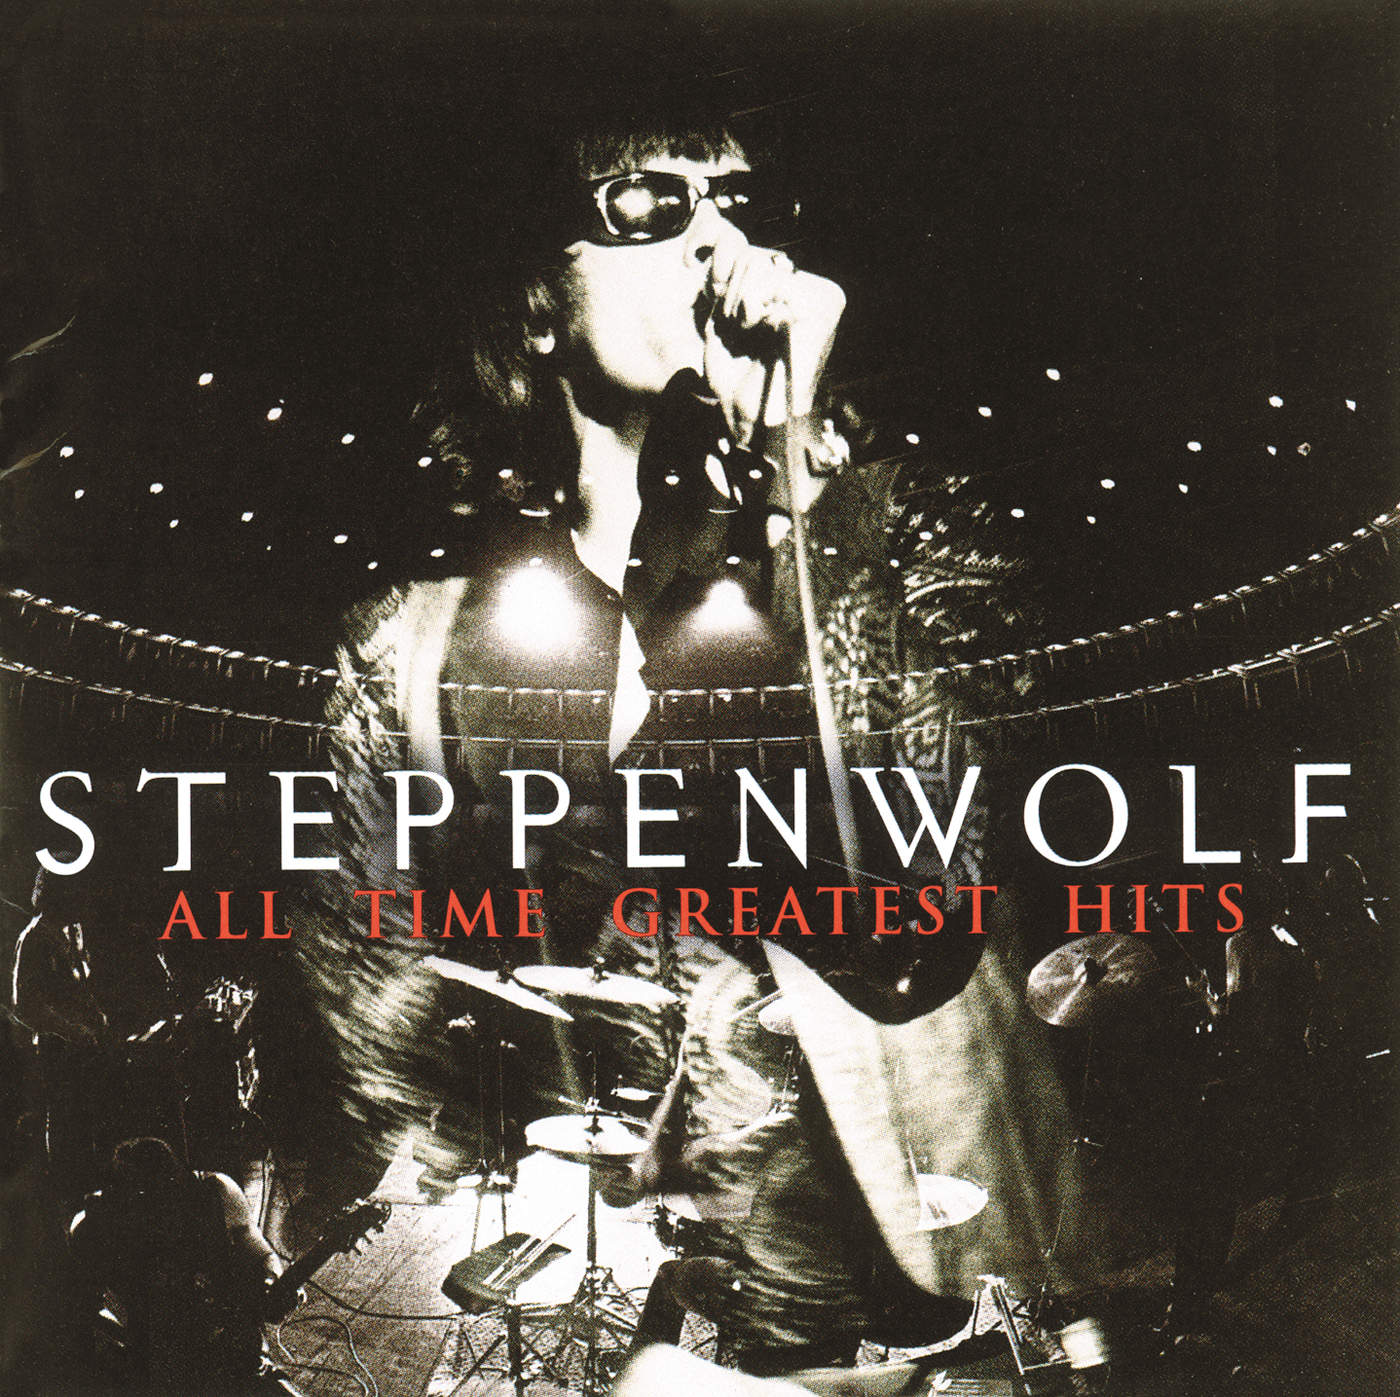 Art for Rock Me by Steppenwolf